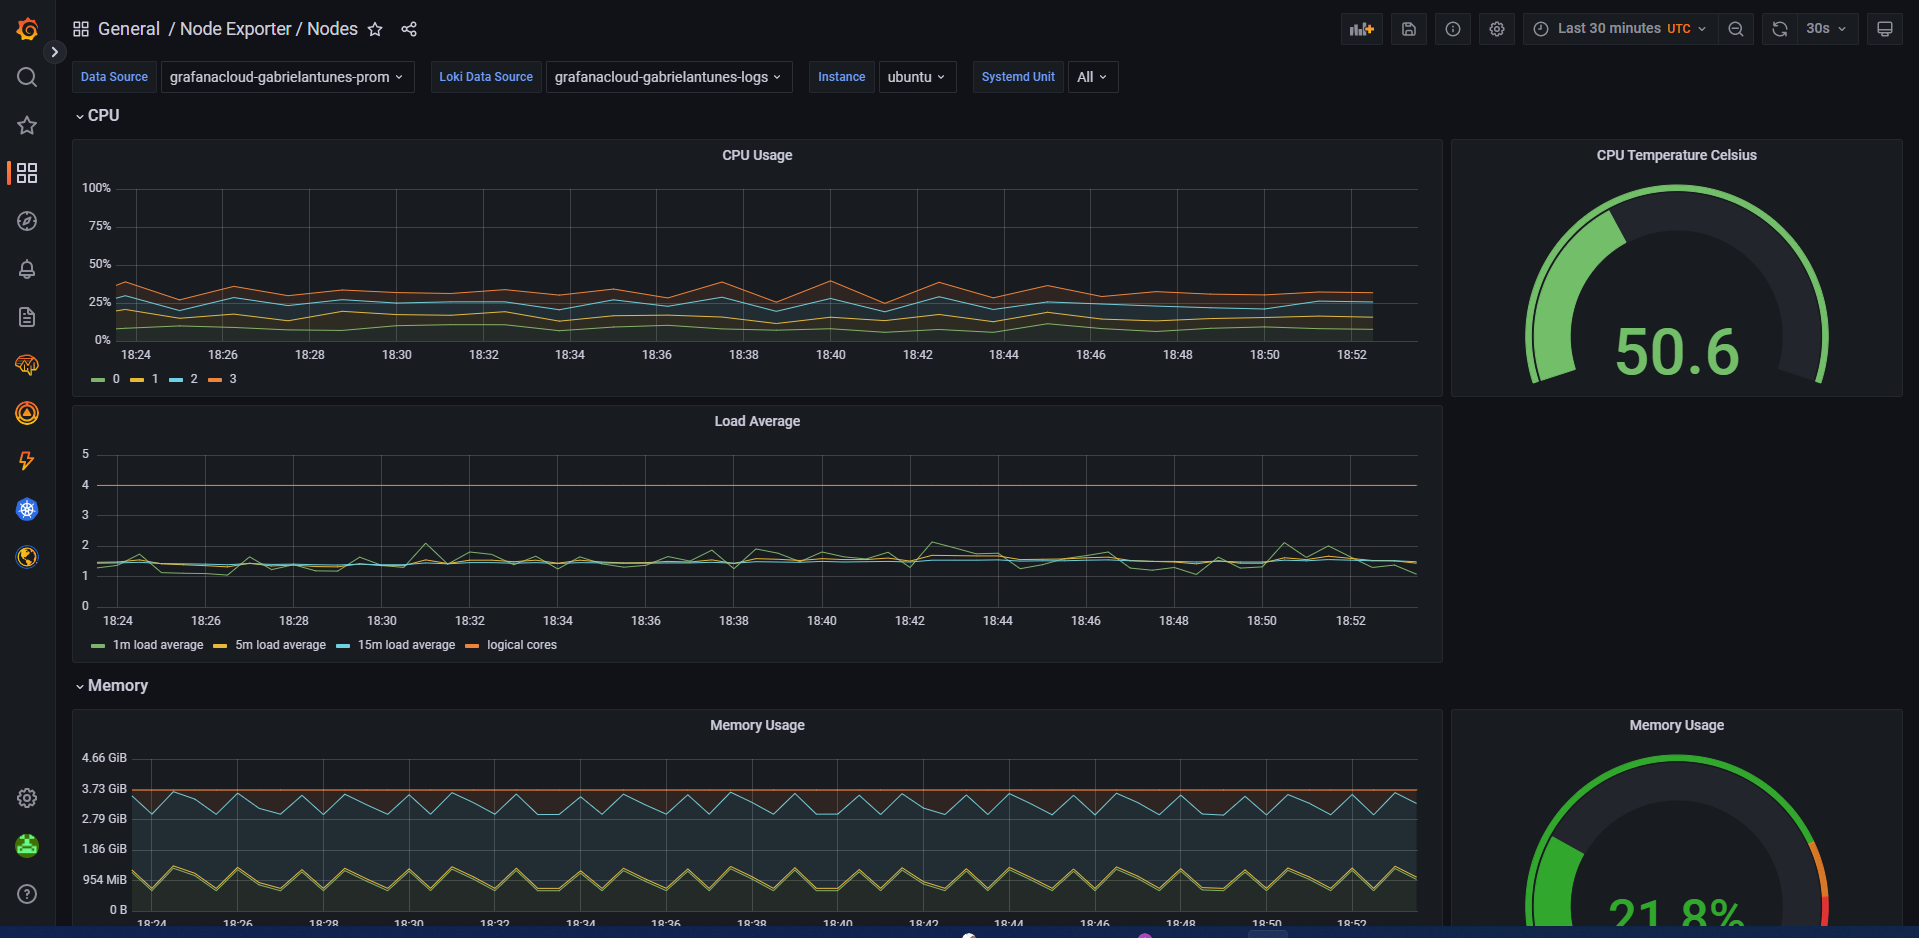 Grafana dashboard that provides an overview of Raspberry Pi instance in Grafana Cloud.